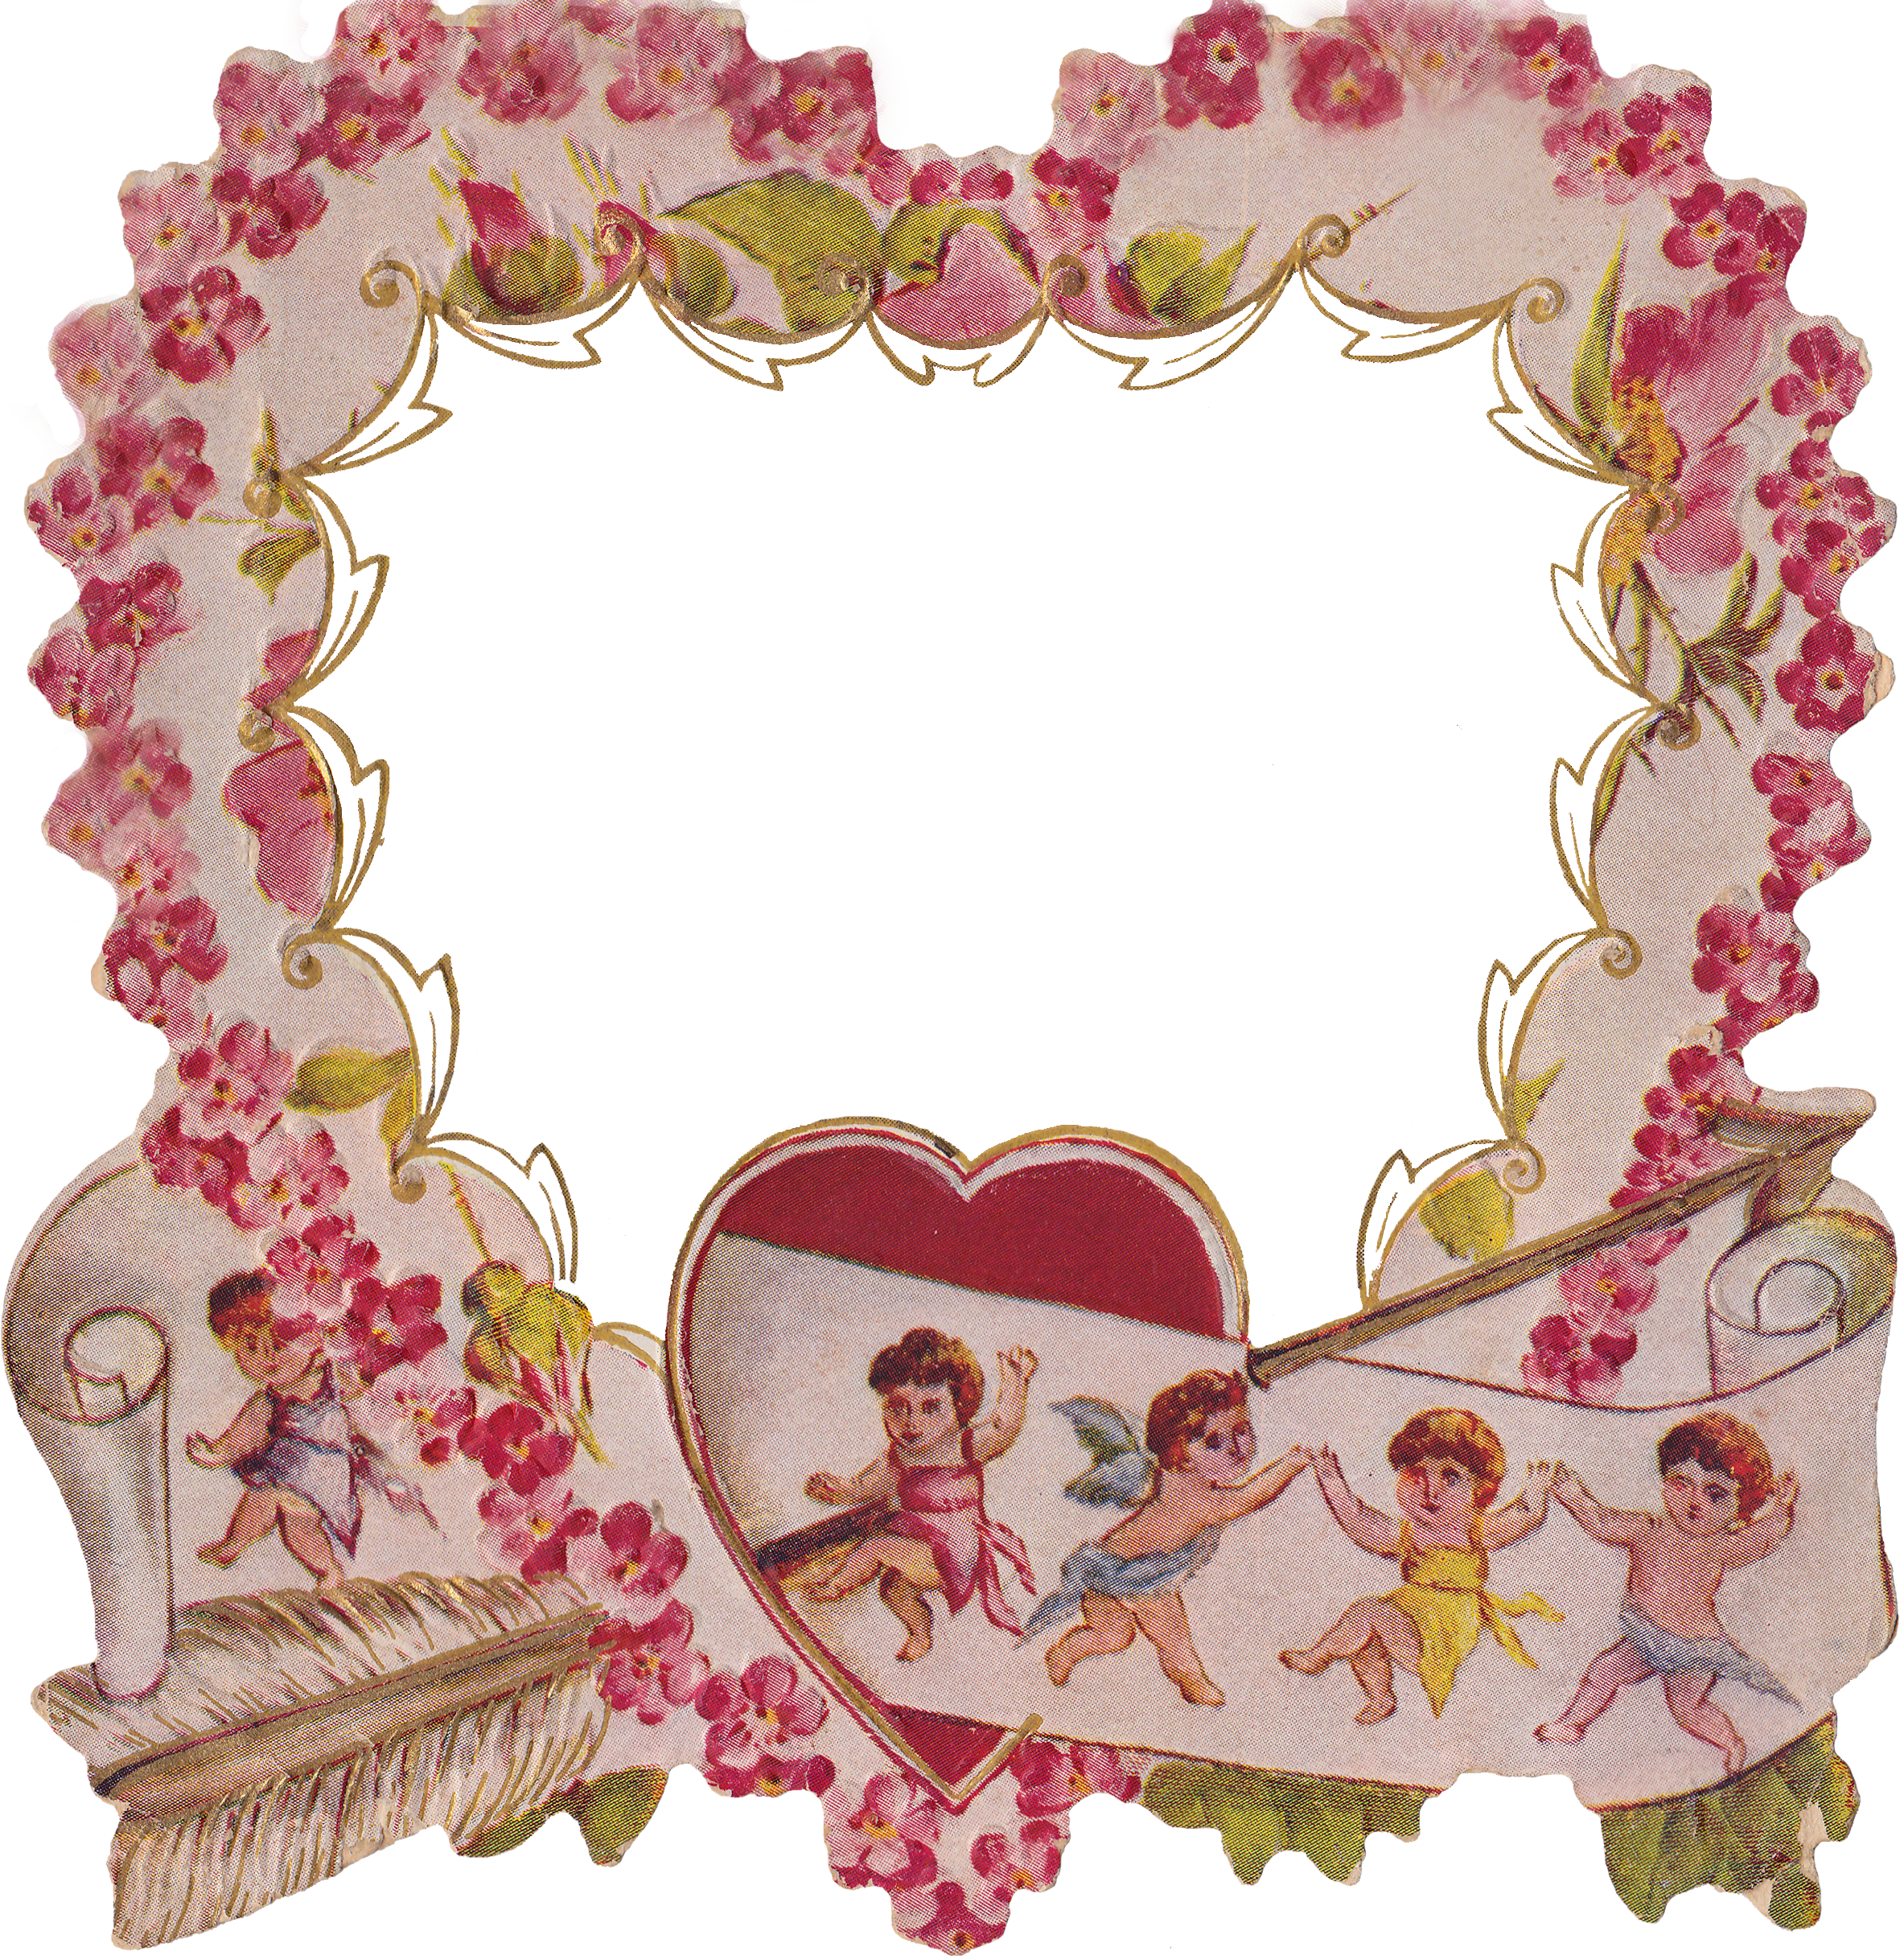 A Frame With Flowers And Angels